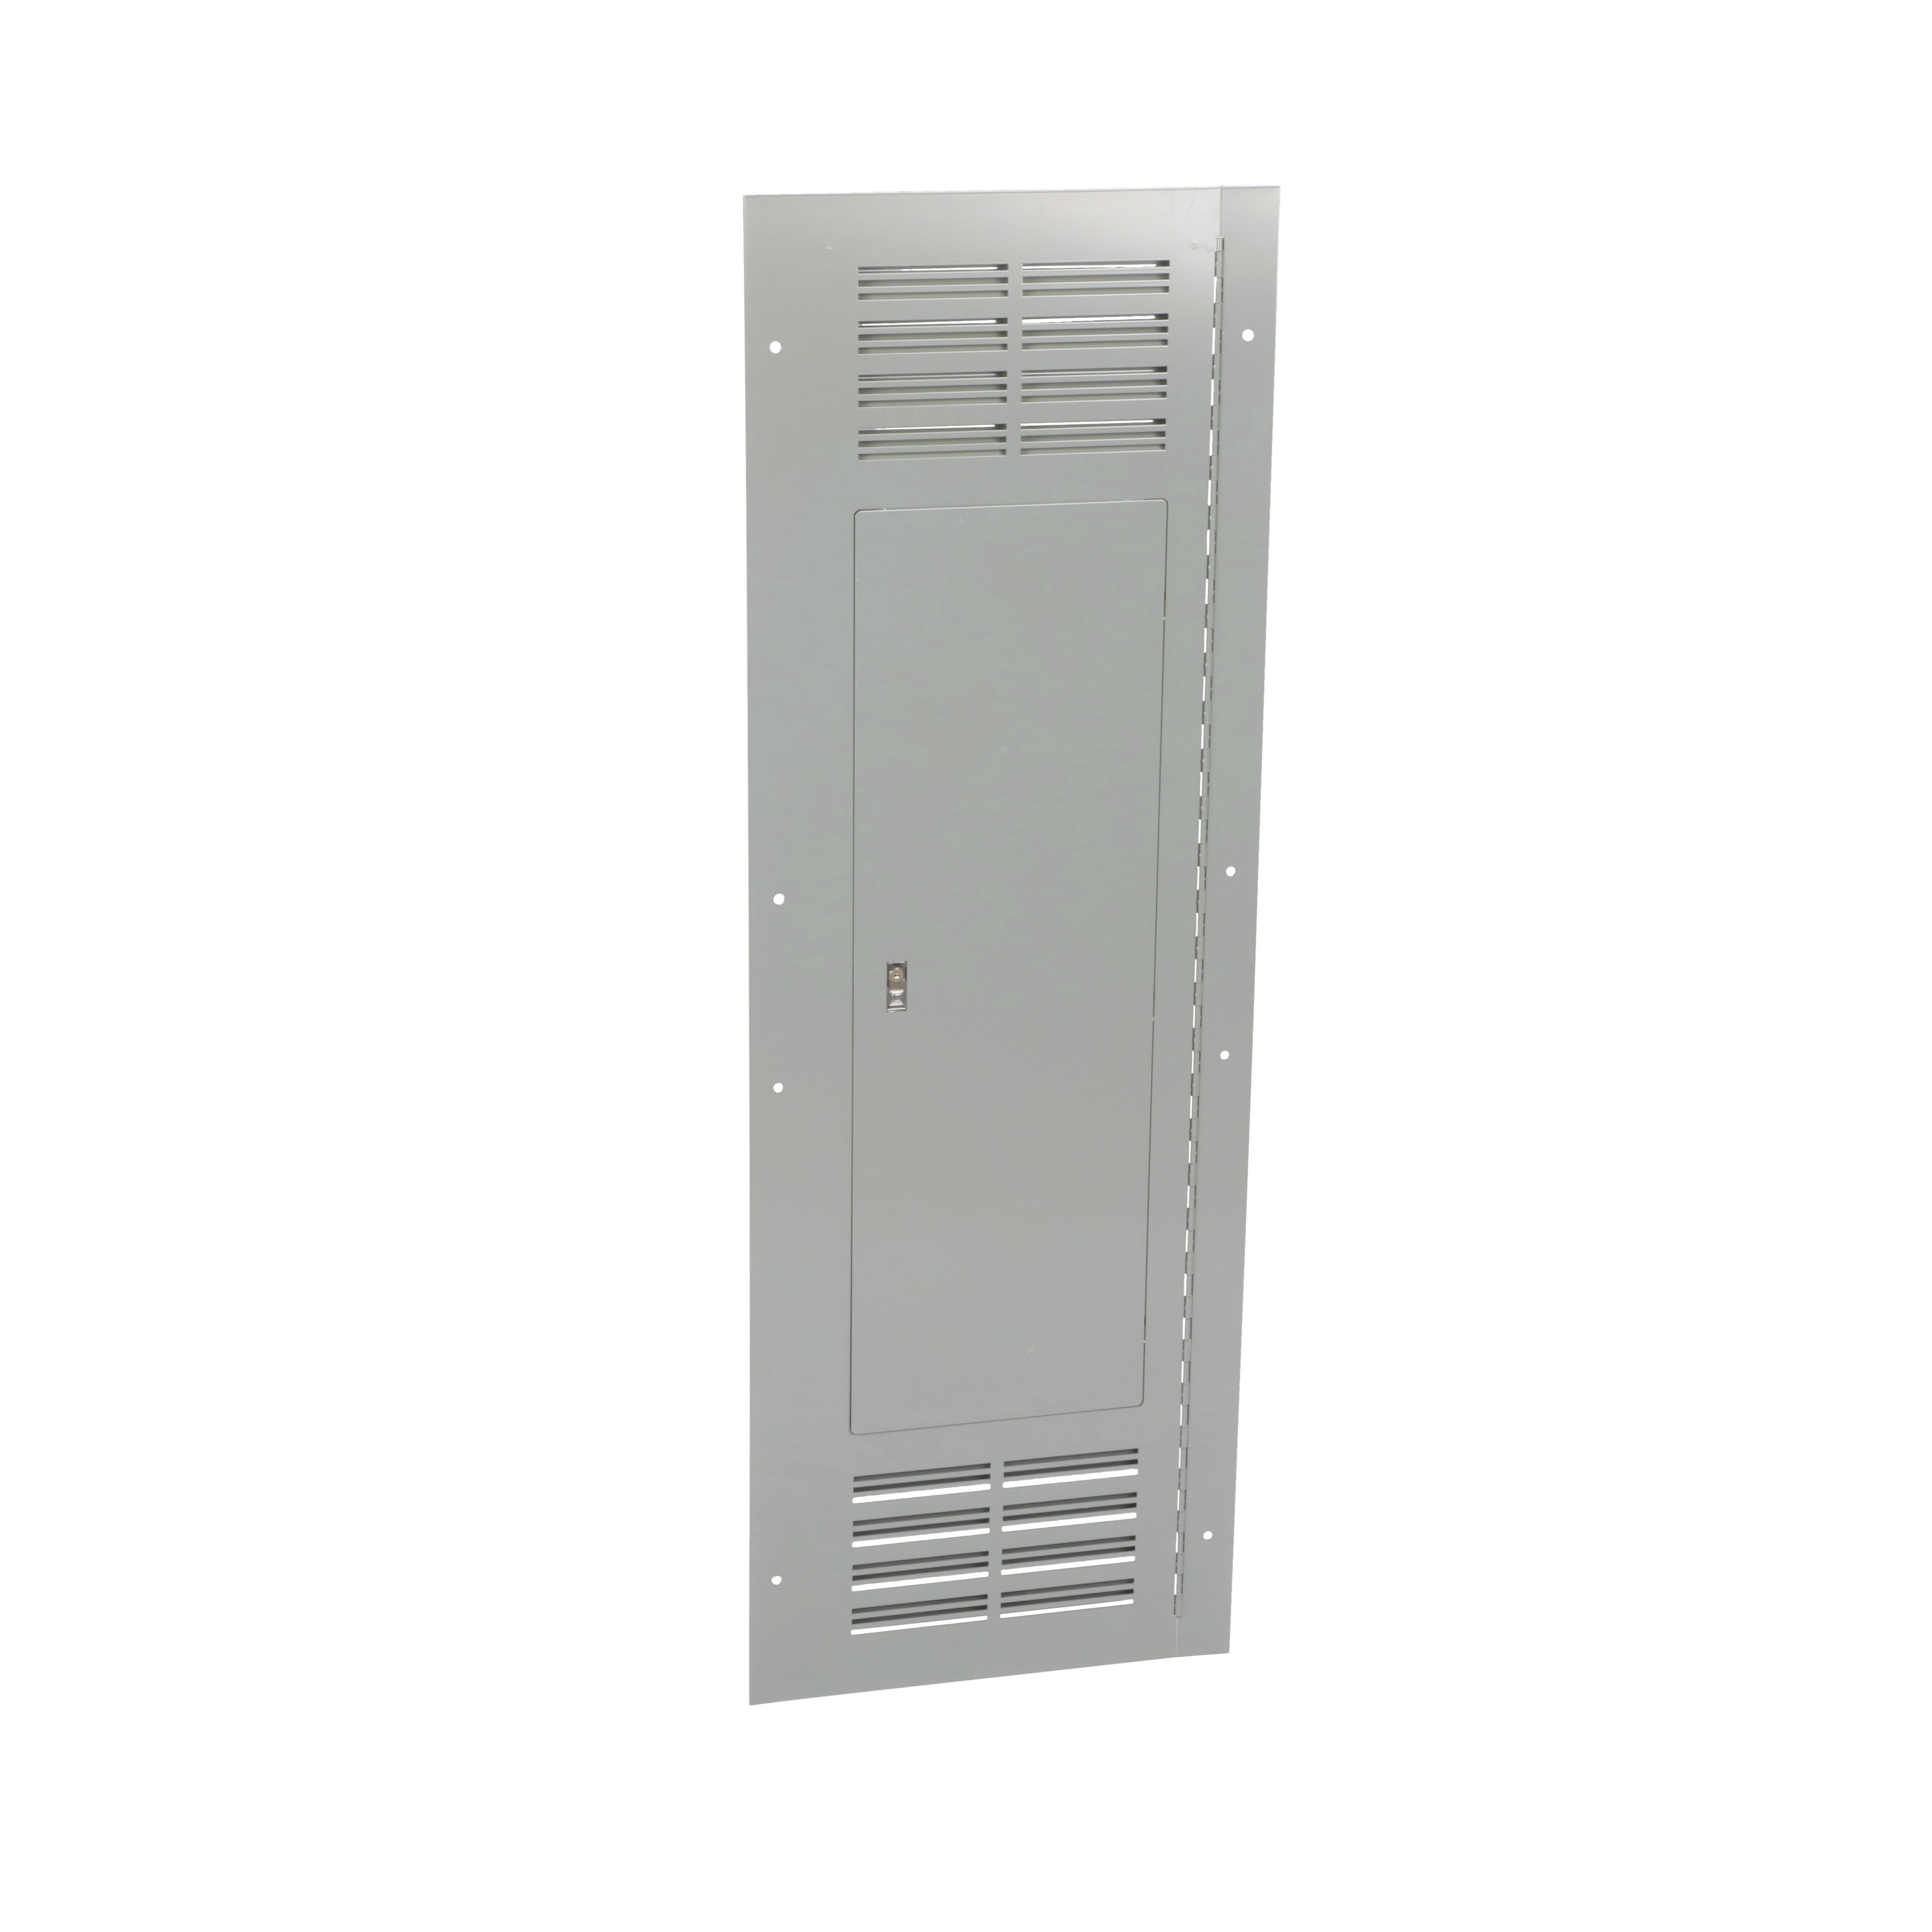 Enclosure cover, NQ and NF panelboards, NEMA 1, flush, ventilated, hinged, 20in W x 62in H